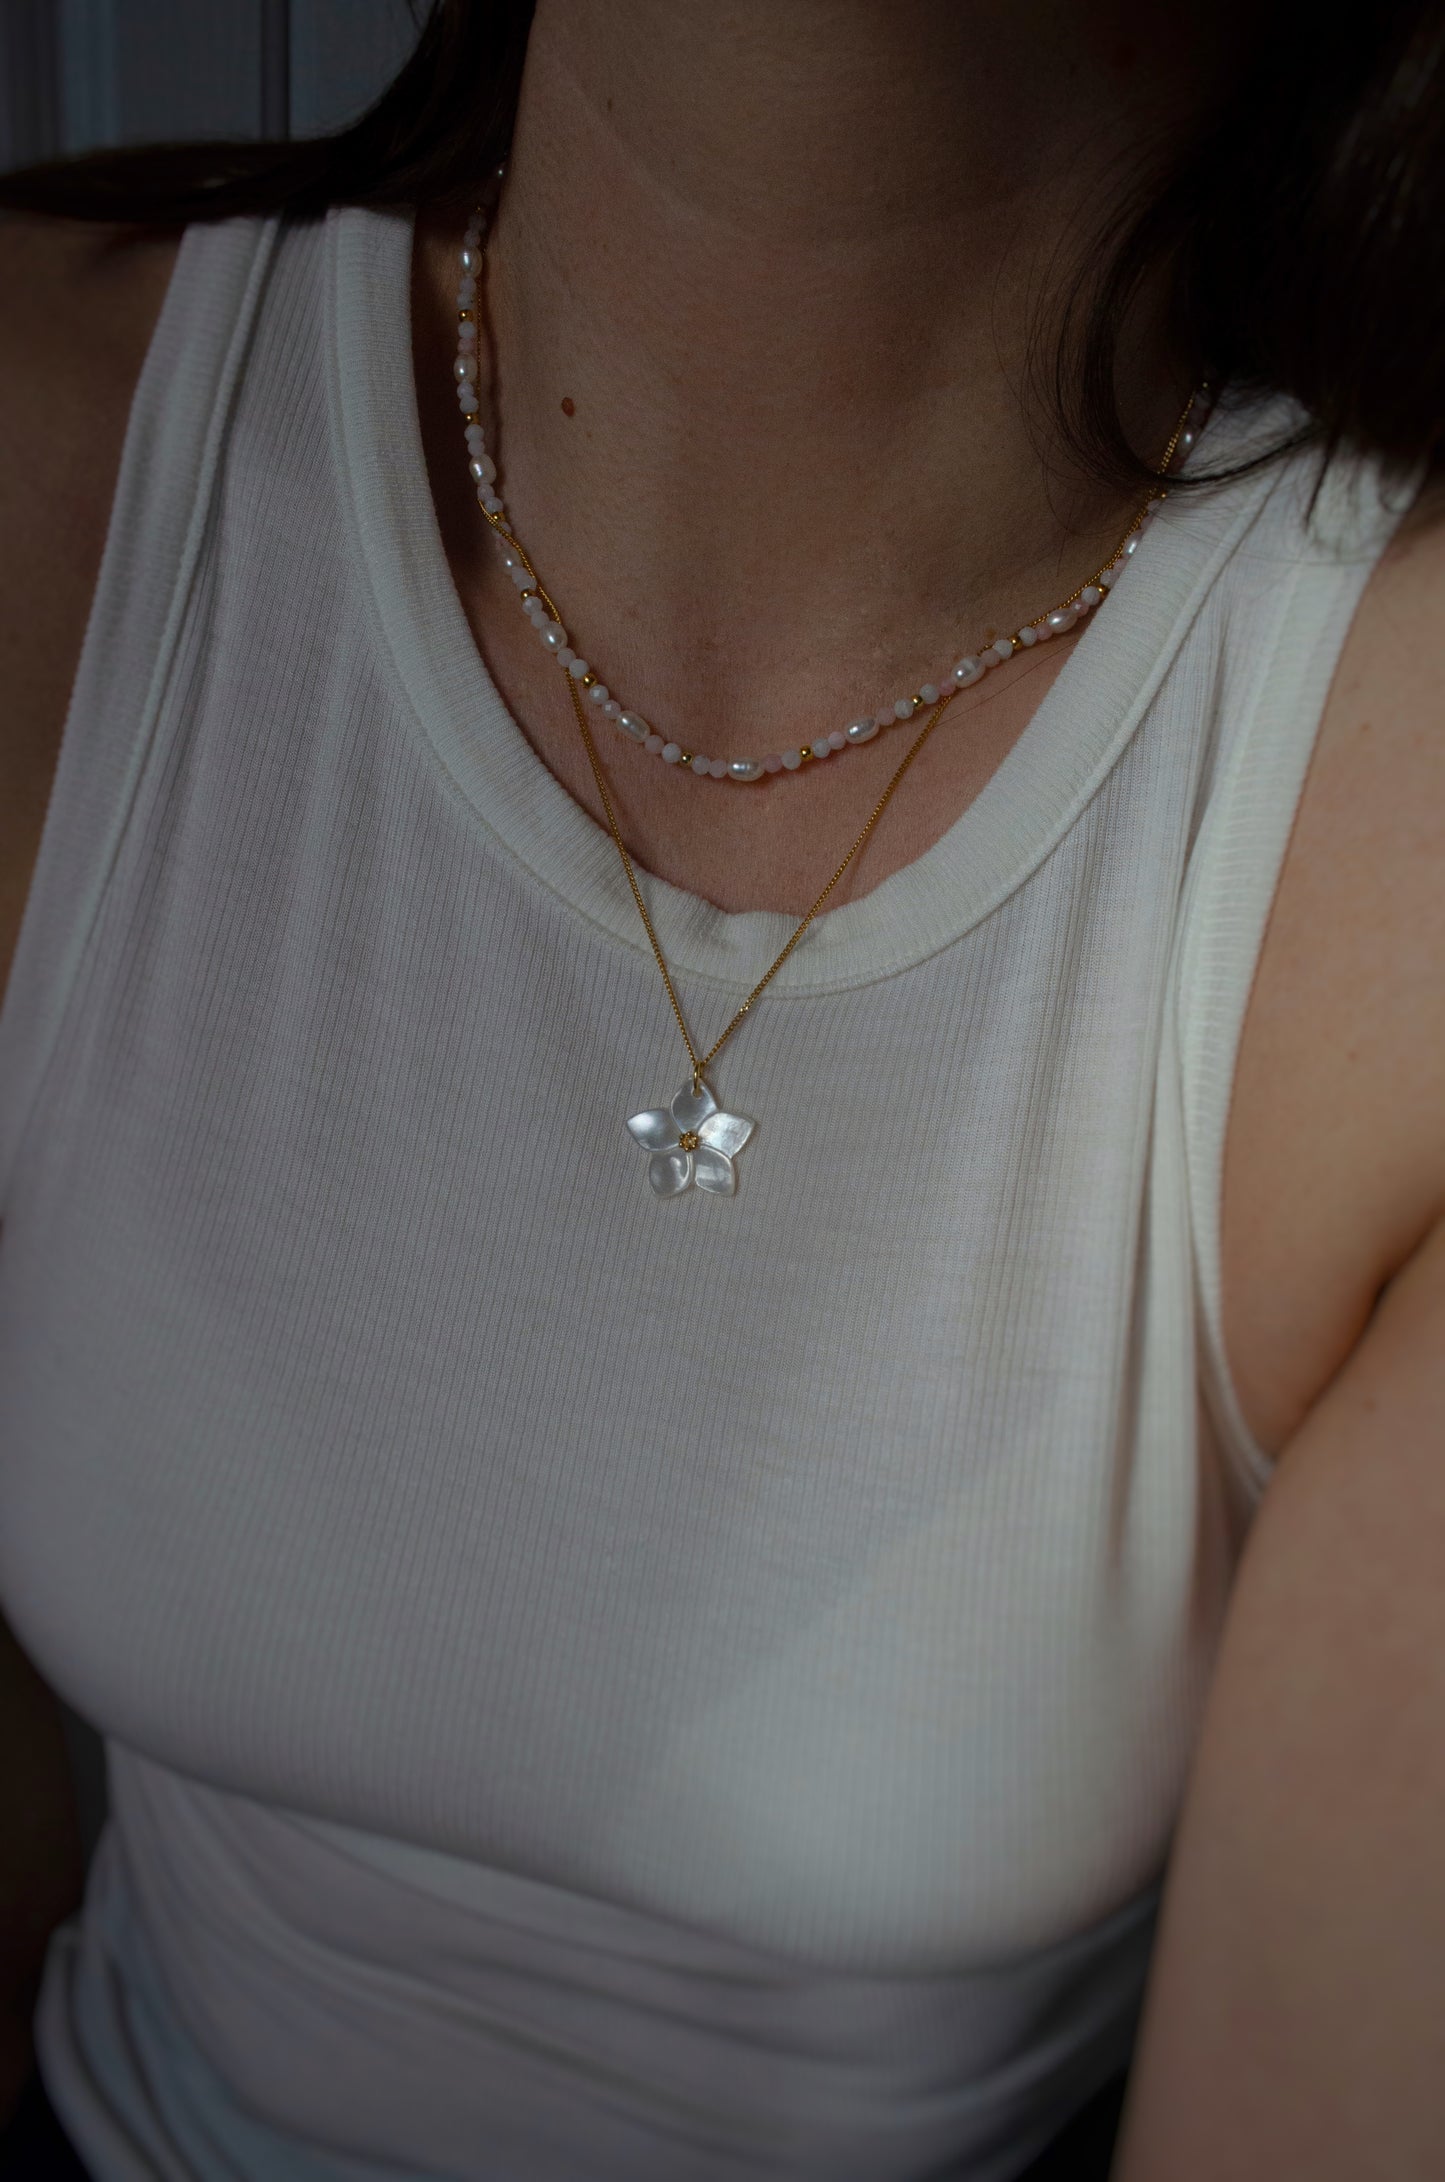 White Flower necklace